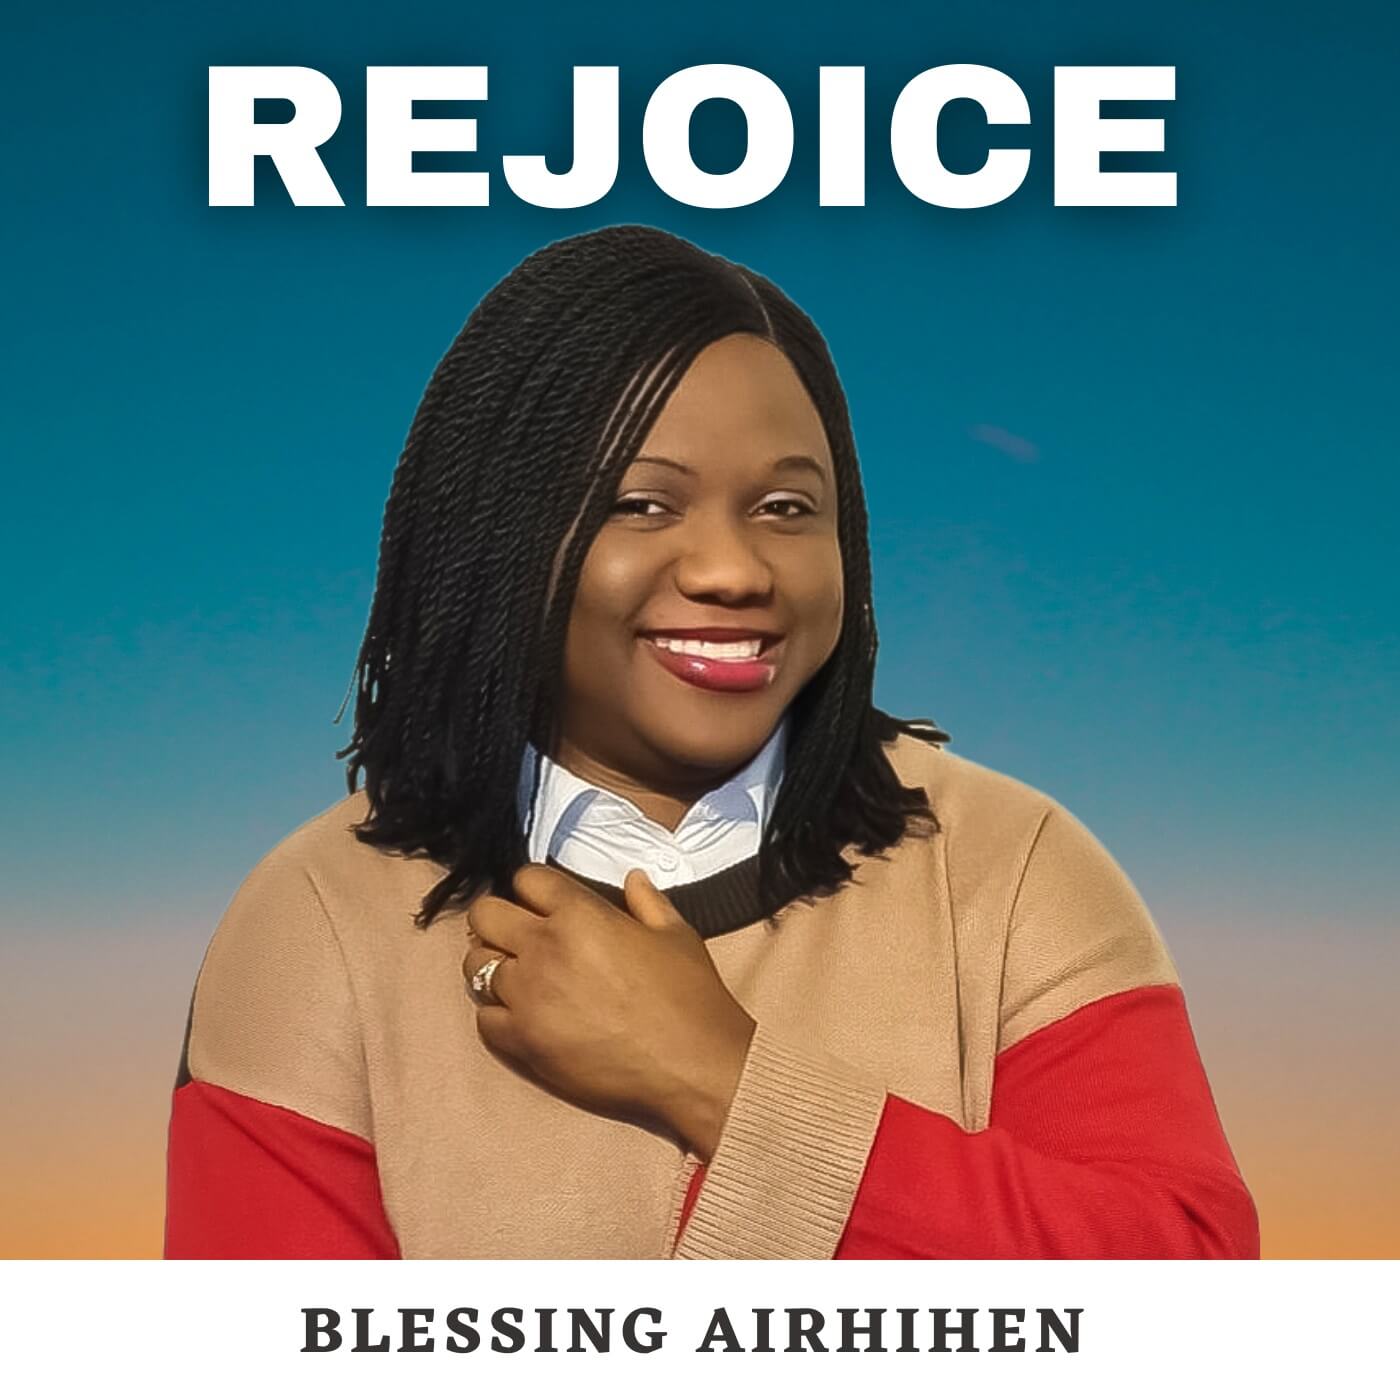 Rejoice by Blessing Airhihen